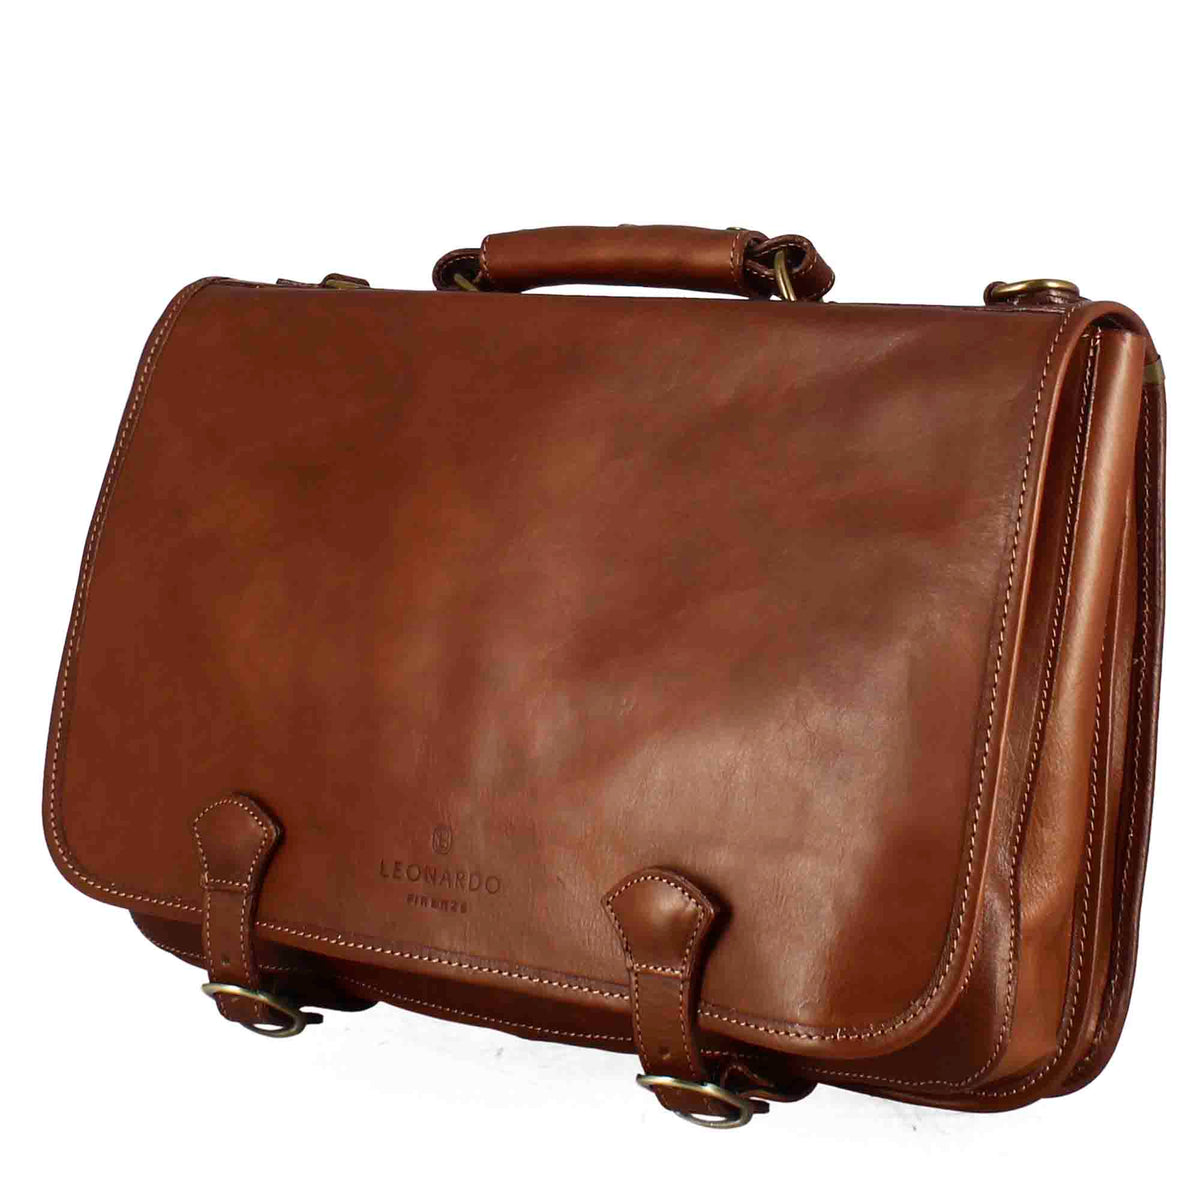 Professional briefcase in full-grain leather flap closure with double buckle dark brown colour